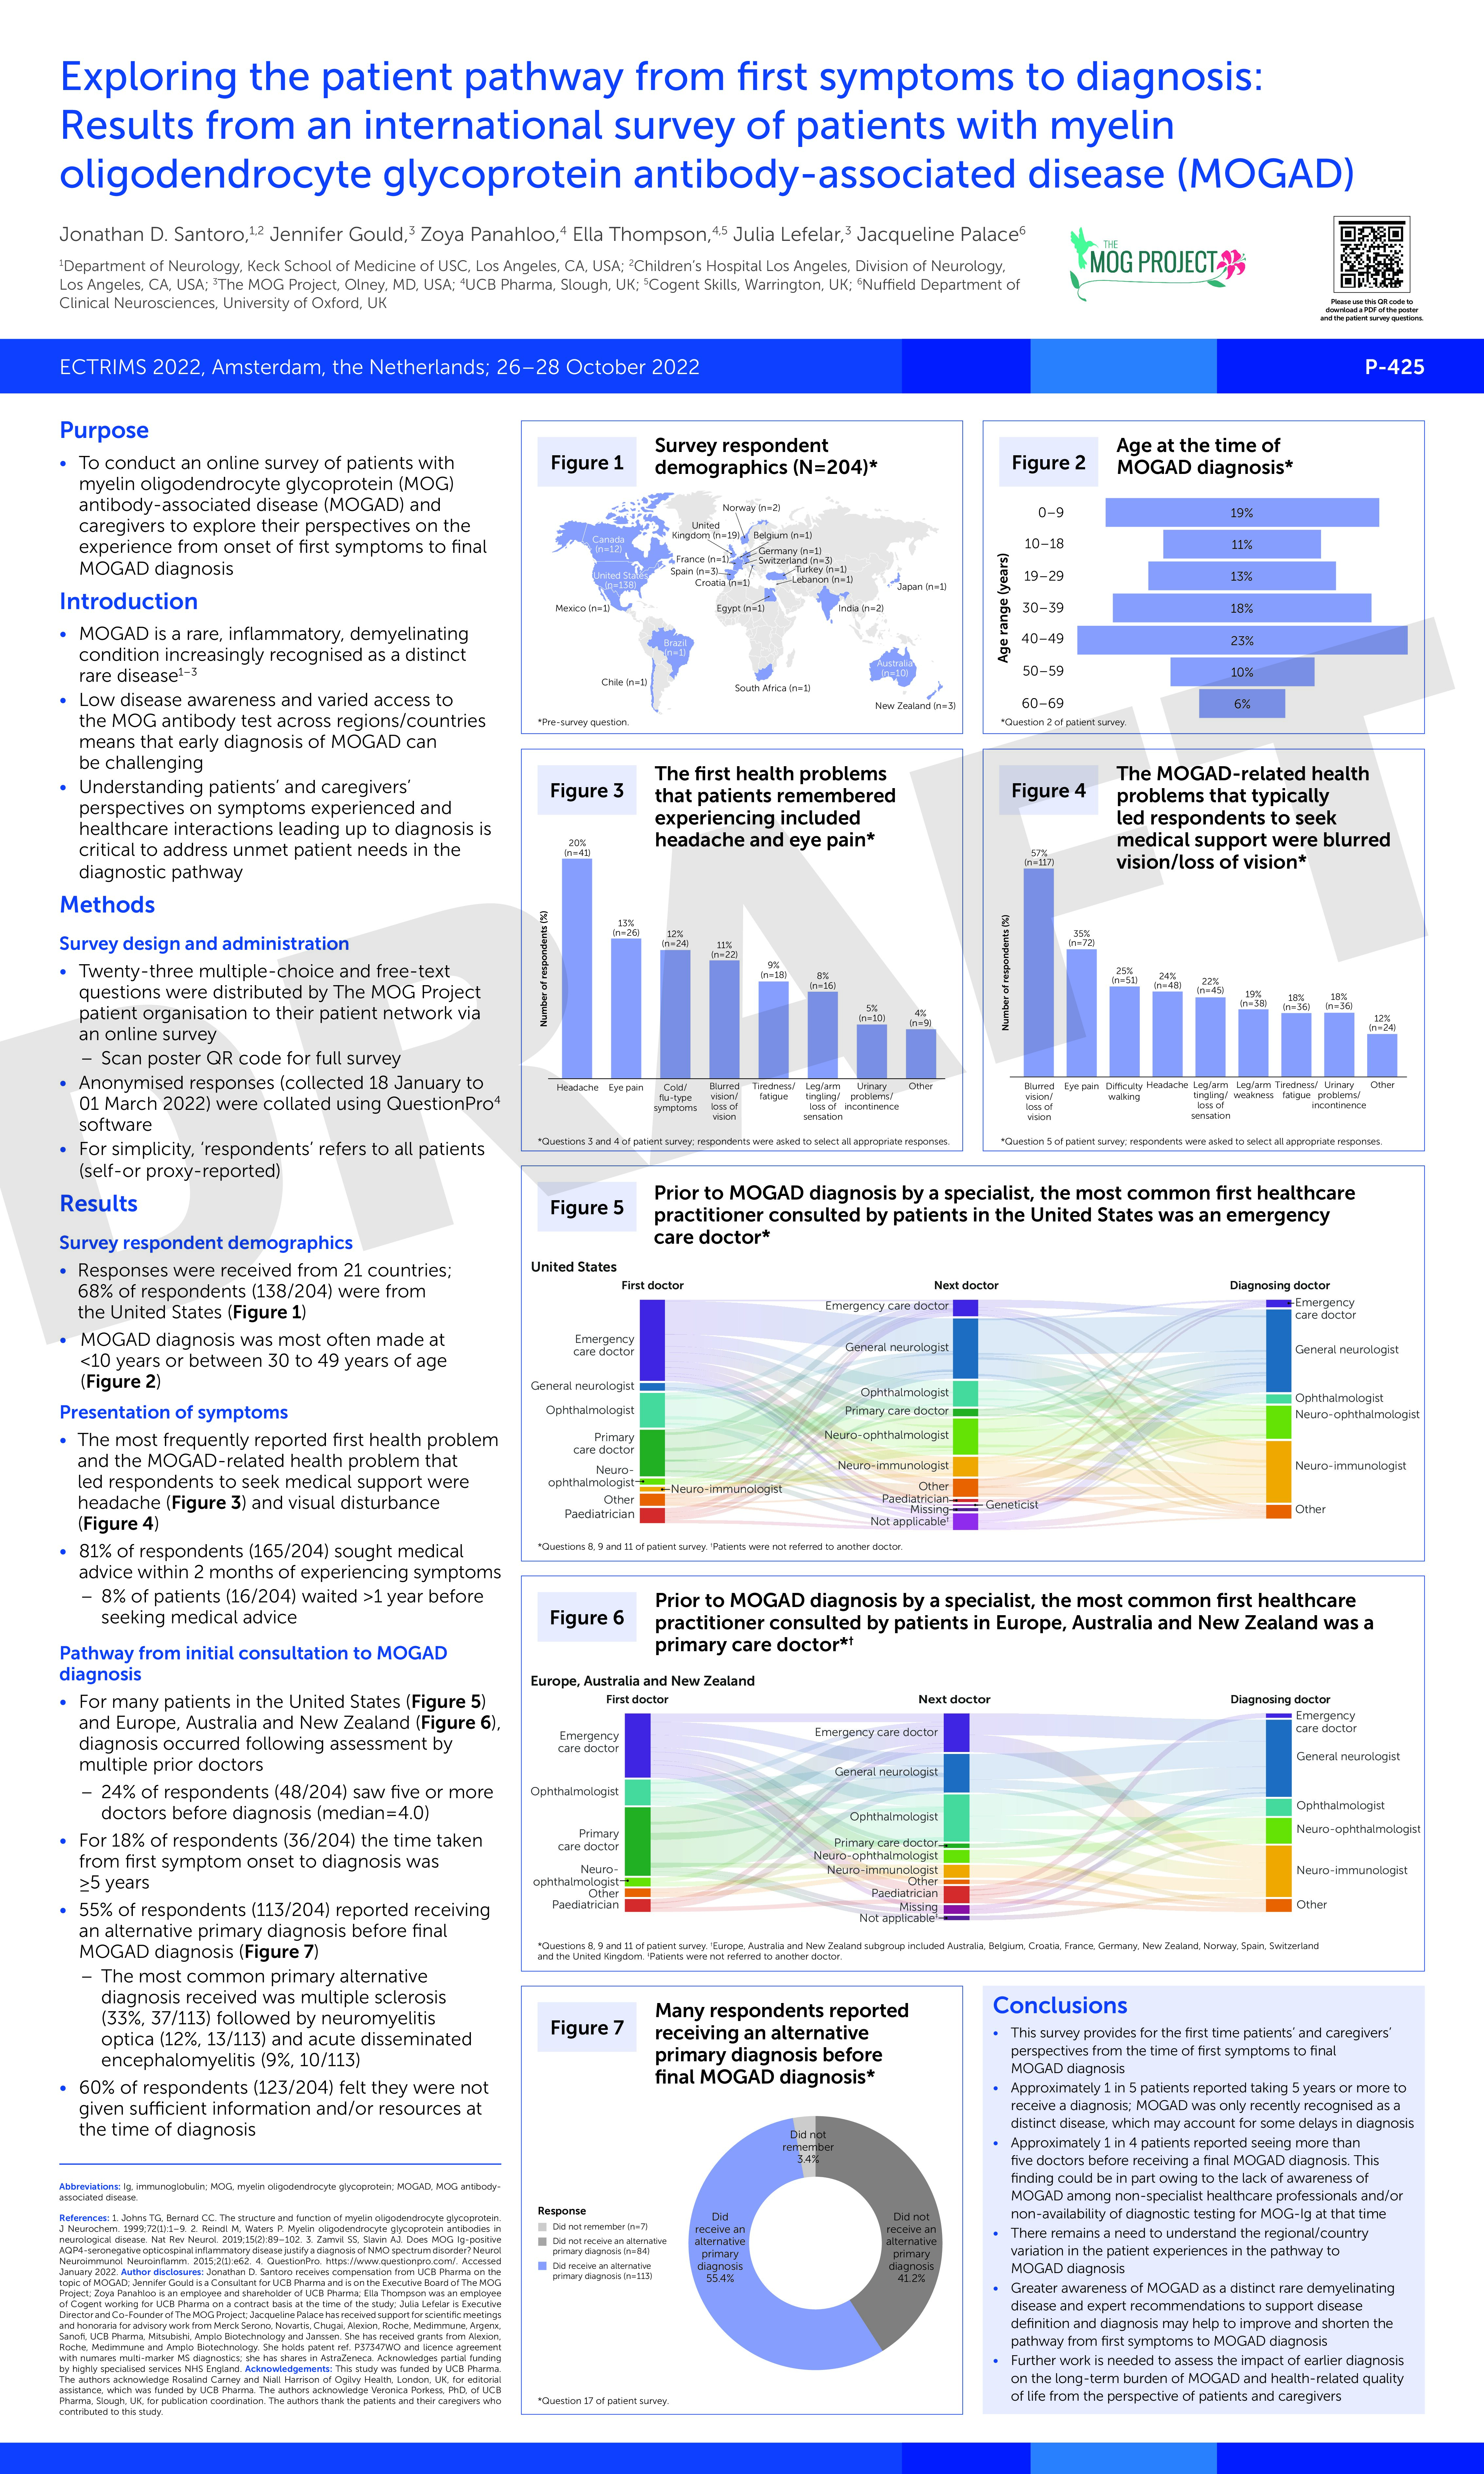 Poster: Exploring the patient pathway from first symptoms to diagnosis: Results from an international survey of patients with myelin oligodendrocyte glycoprotein antibody-associated disease (MOGAD)